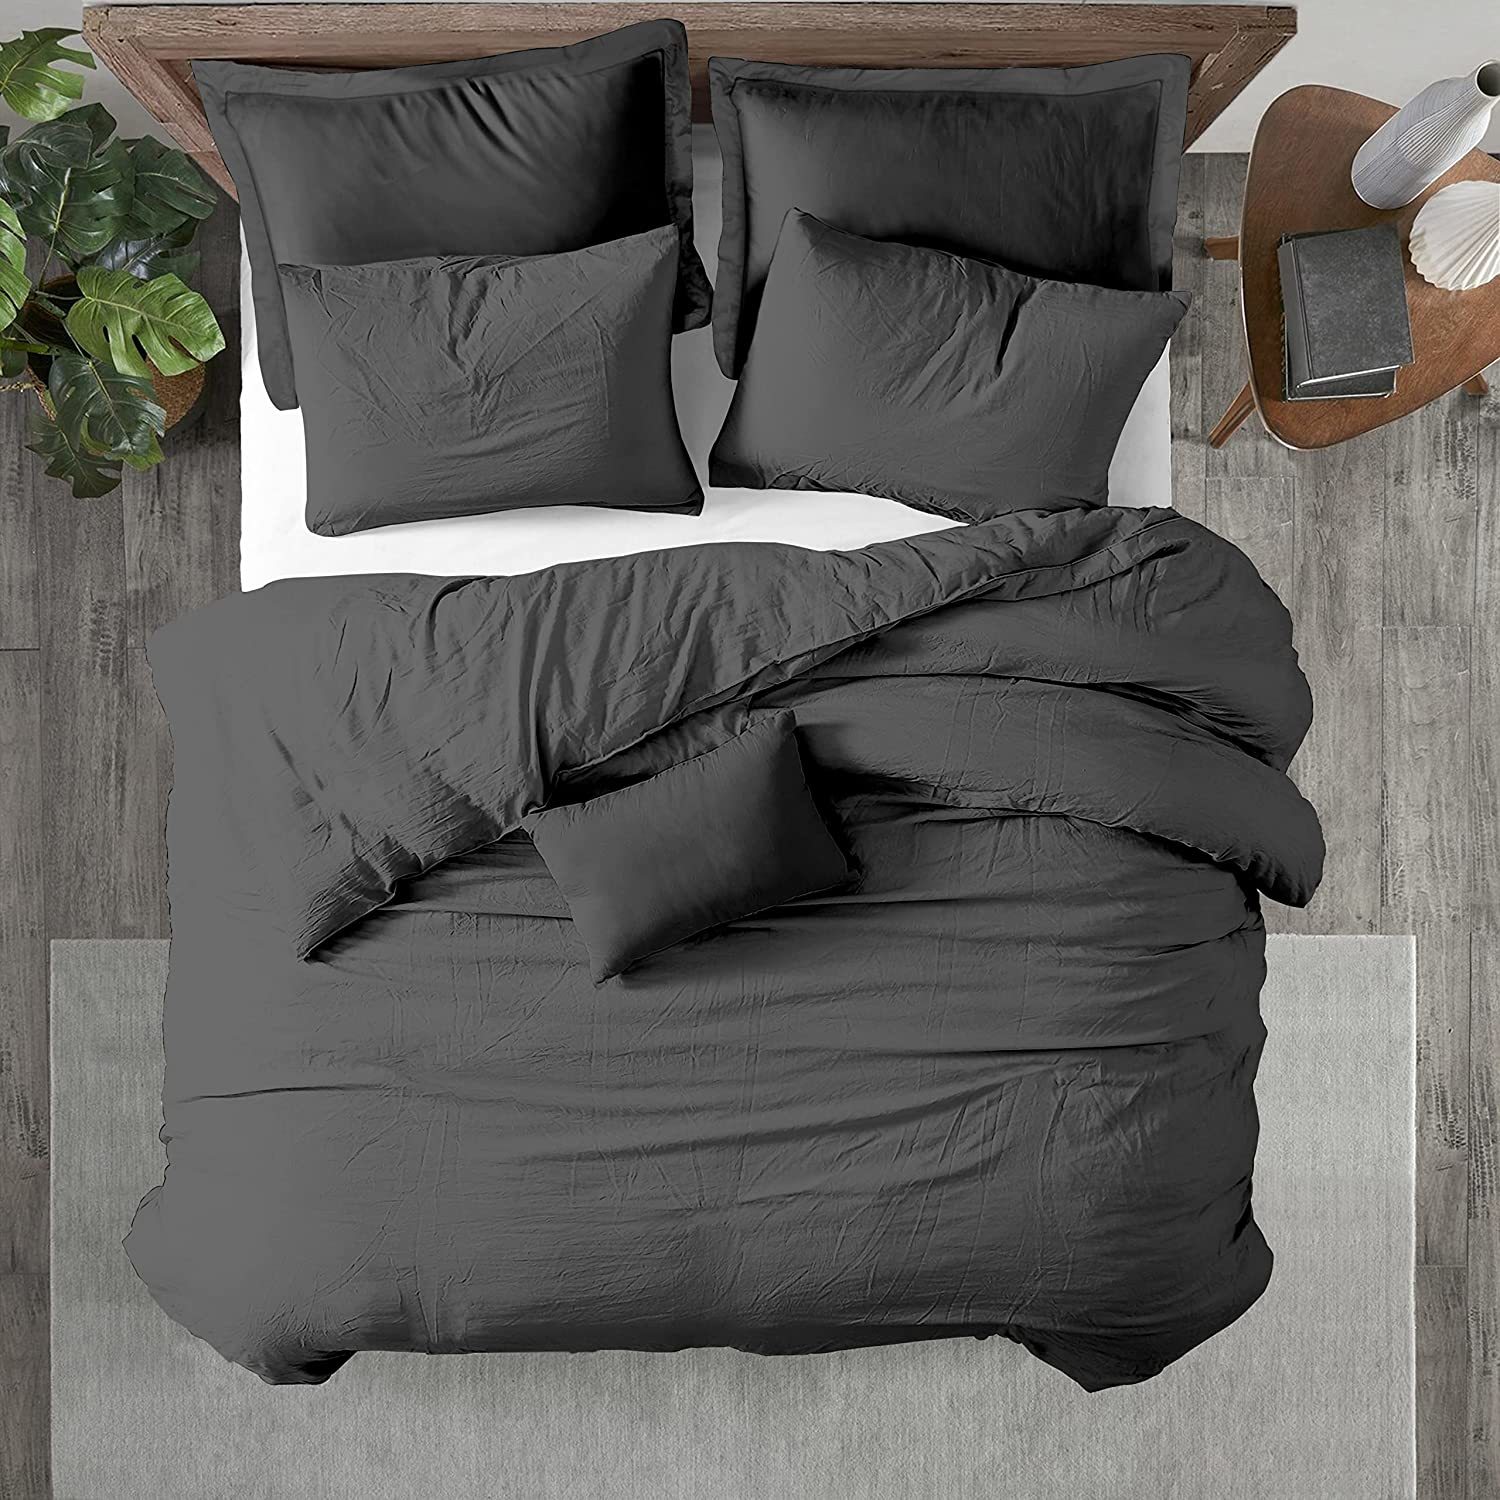 Primary image for Kotton Culture 600 Thread Count 100% Egyptian Cotton, Oversized King, Grey